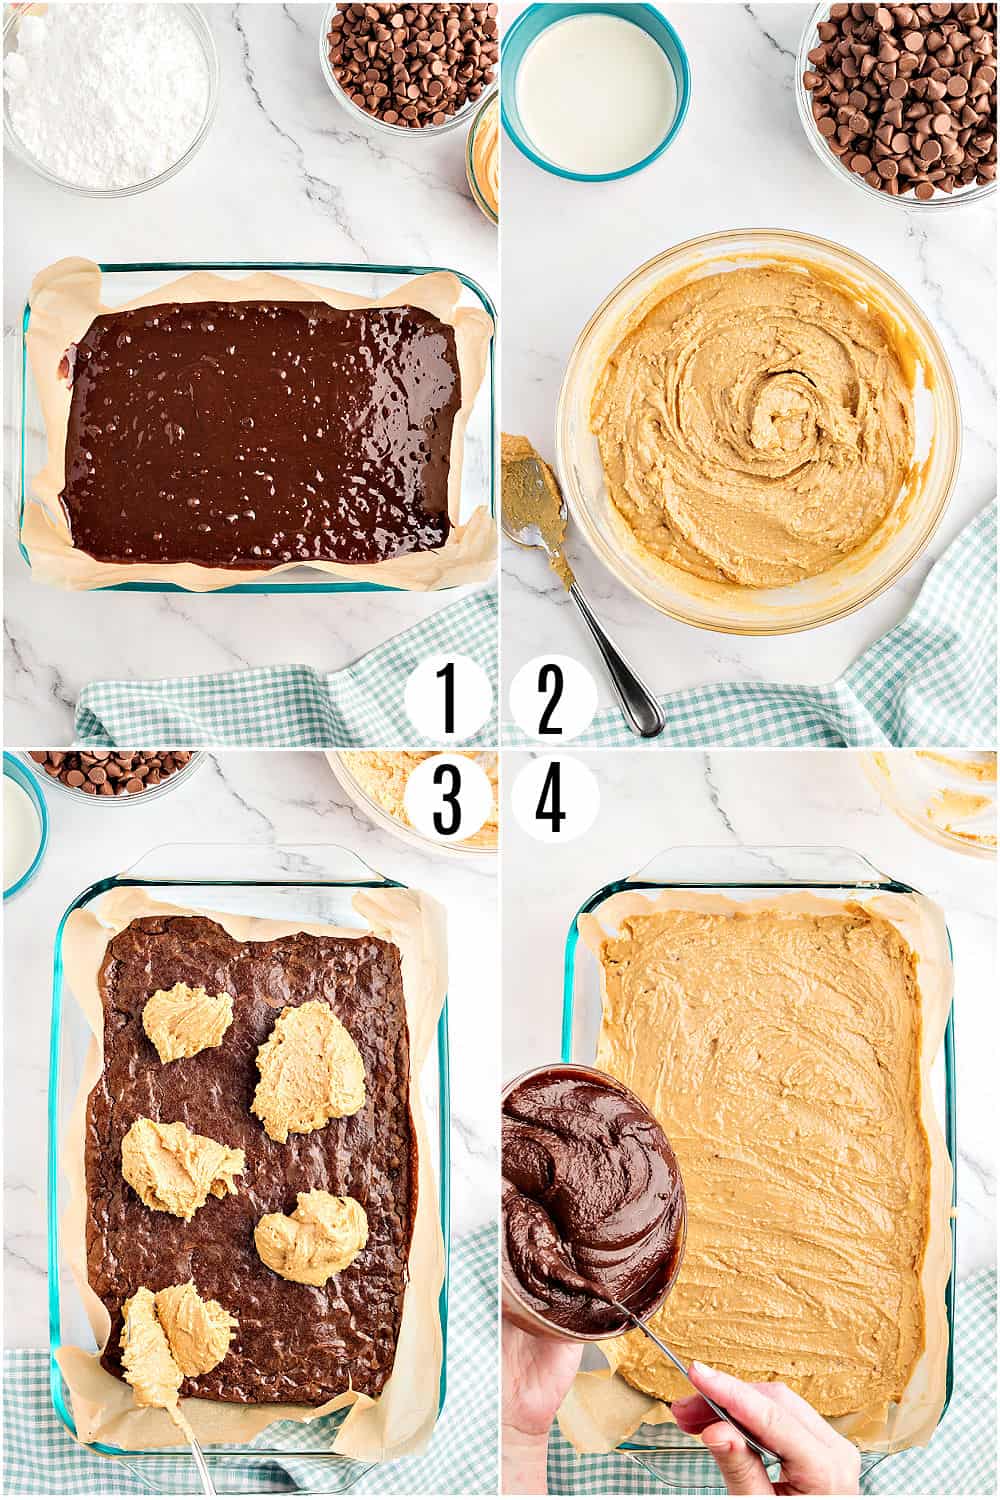 Step by step photos showing how to make buckeye brownies.